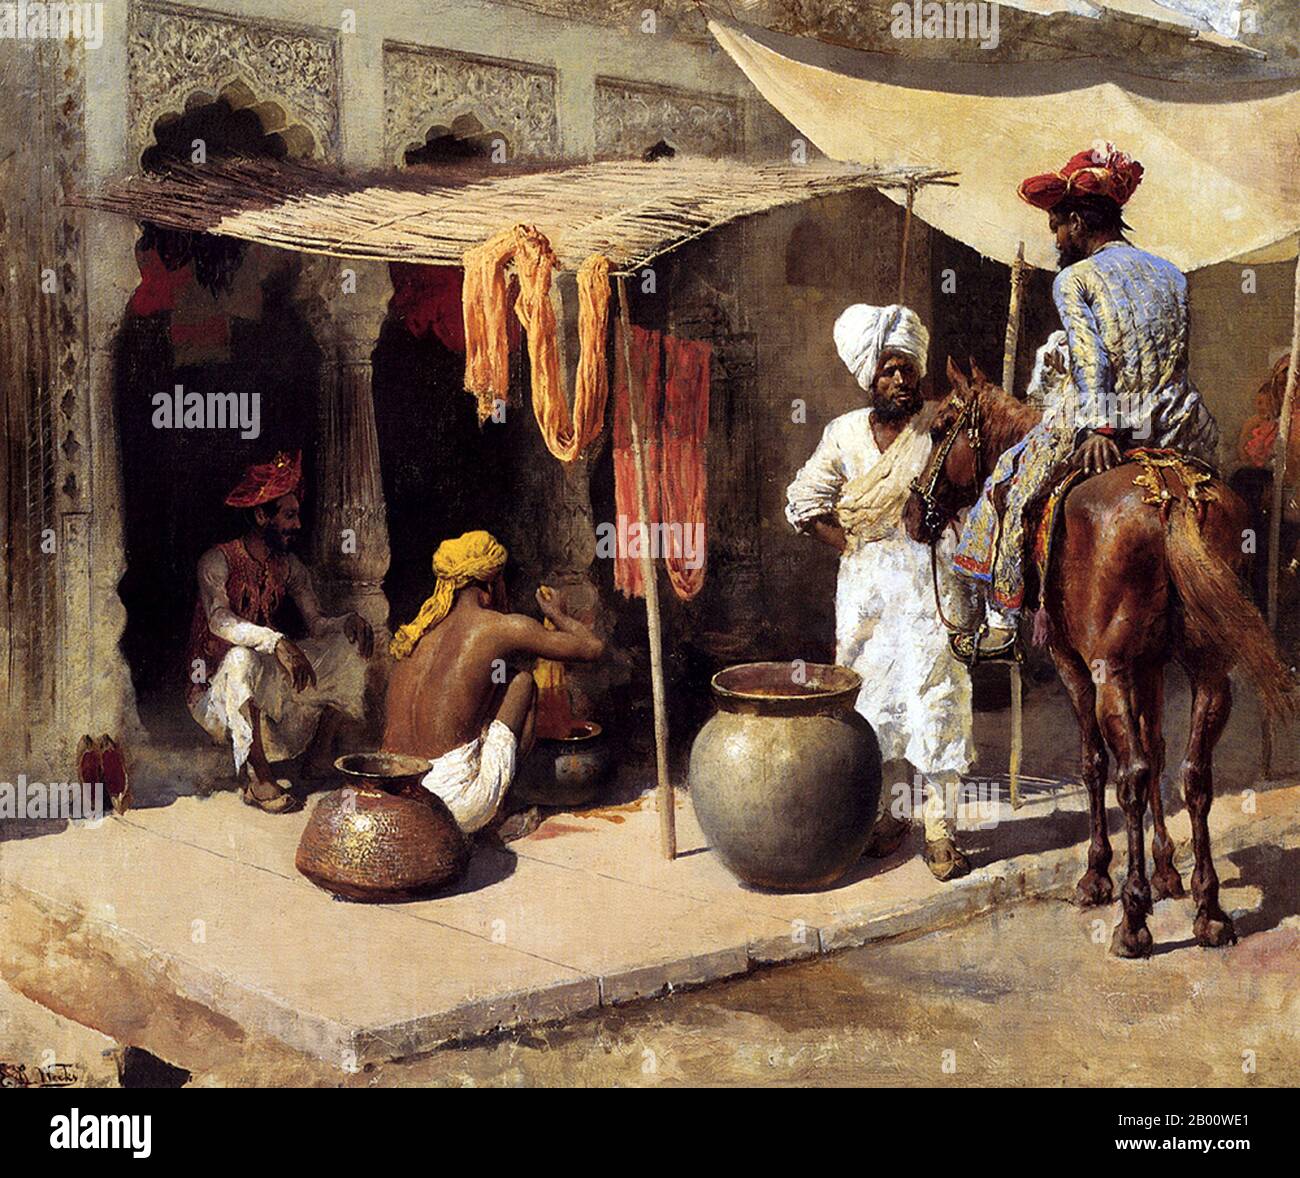 India: 'Outside an Indian Dye House'. Oil on canvas painting by Edwin Lord Weeks (1849-1903), c. 1885.  Edwin Lord Weeks (1849 – 1903), American artist and Orientalist, was born at Boston, Massachusetts, in 1849. He was a pupil of Léon Bonnat and of Jean-Léon Gérôme, at Paris. He made many voyages to the East, and was distinguished as a painter of oriental scenes.  Weeks' parents were affluent spice and tea merchants from Newton, a suburb of Boston and as such they were able to accept, probably encourage, and certainly finance their son's youthful interest in painting and travelling. Stock Photo